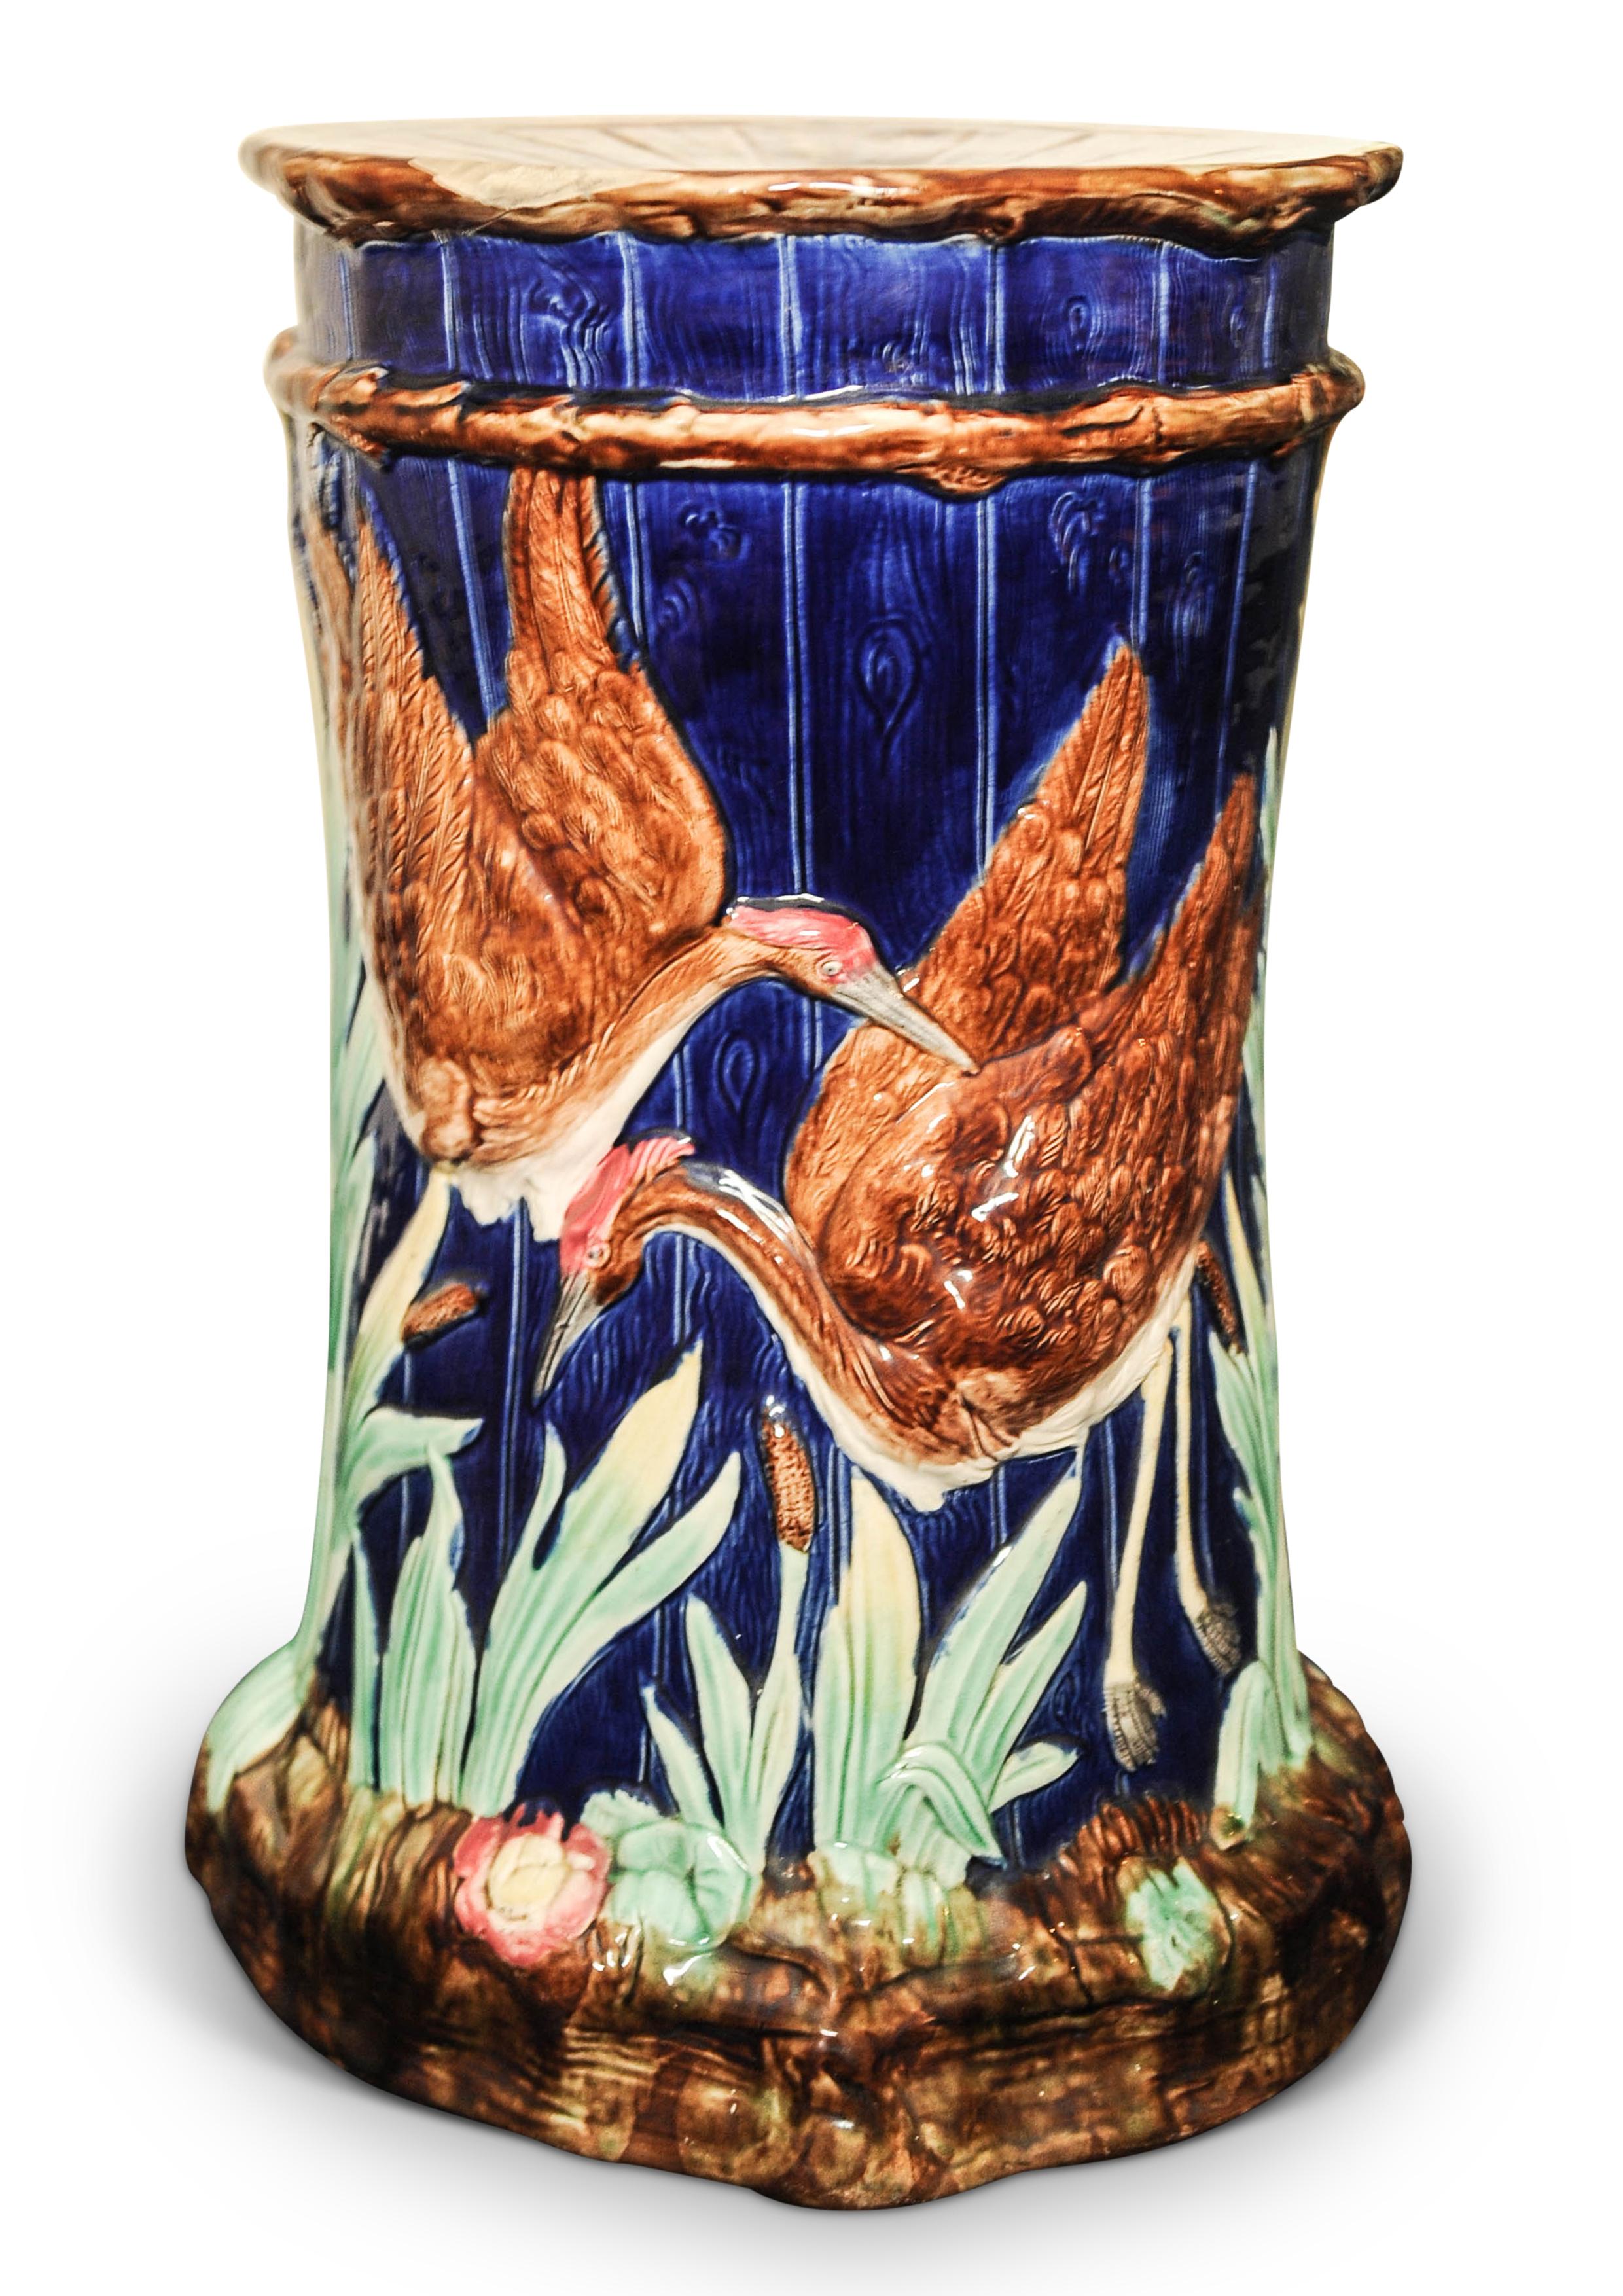 A Late 19th Art Nouveau Thomas Forester & Sons Majolica Ceramic Colbalt Blue Garden Stool Circa 1881-1900

Features a decorative Numidian crane pattern, on a blue backdrop, with raised cranes and foliage, with a pierced seat to the top.

Thomas